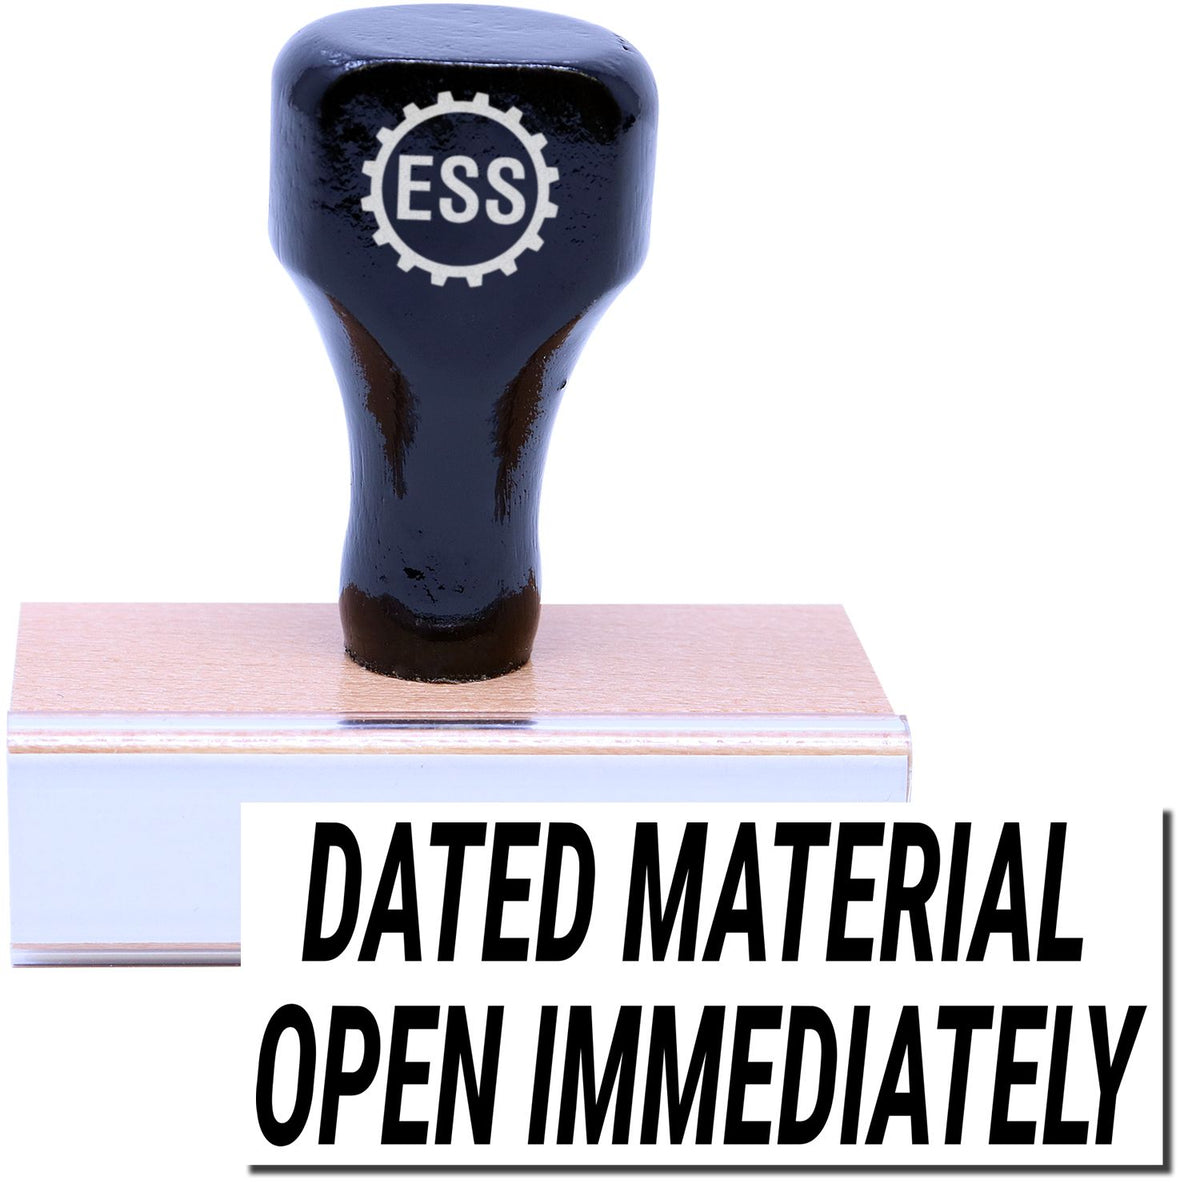 A stock office rubber stamp with a stamped image showing how the text &quot;DATED MATERIAL OPEN IMMEDIATELY&quot; is displayed after stamping.